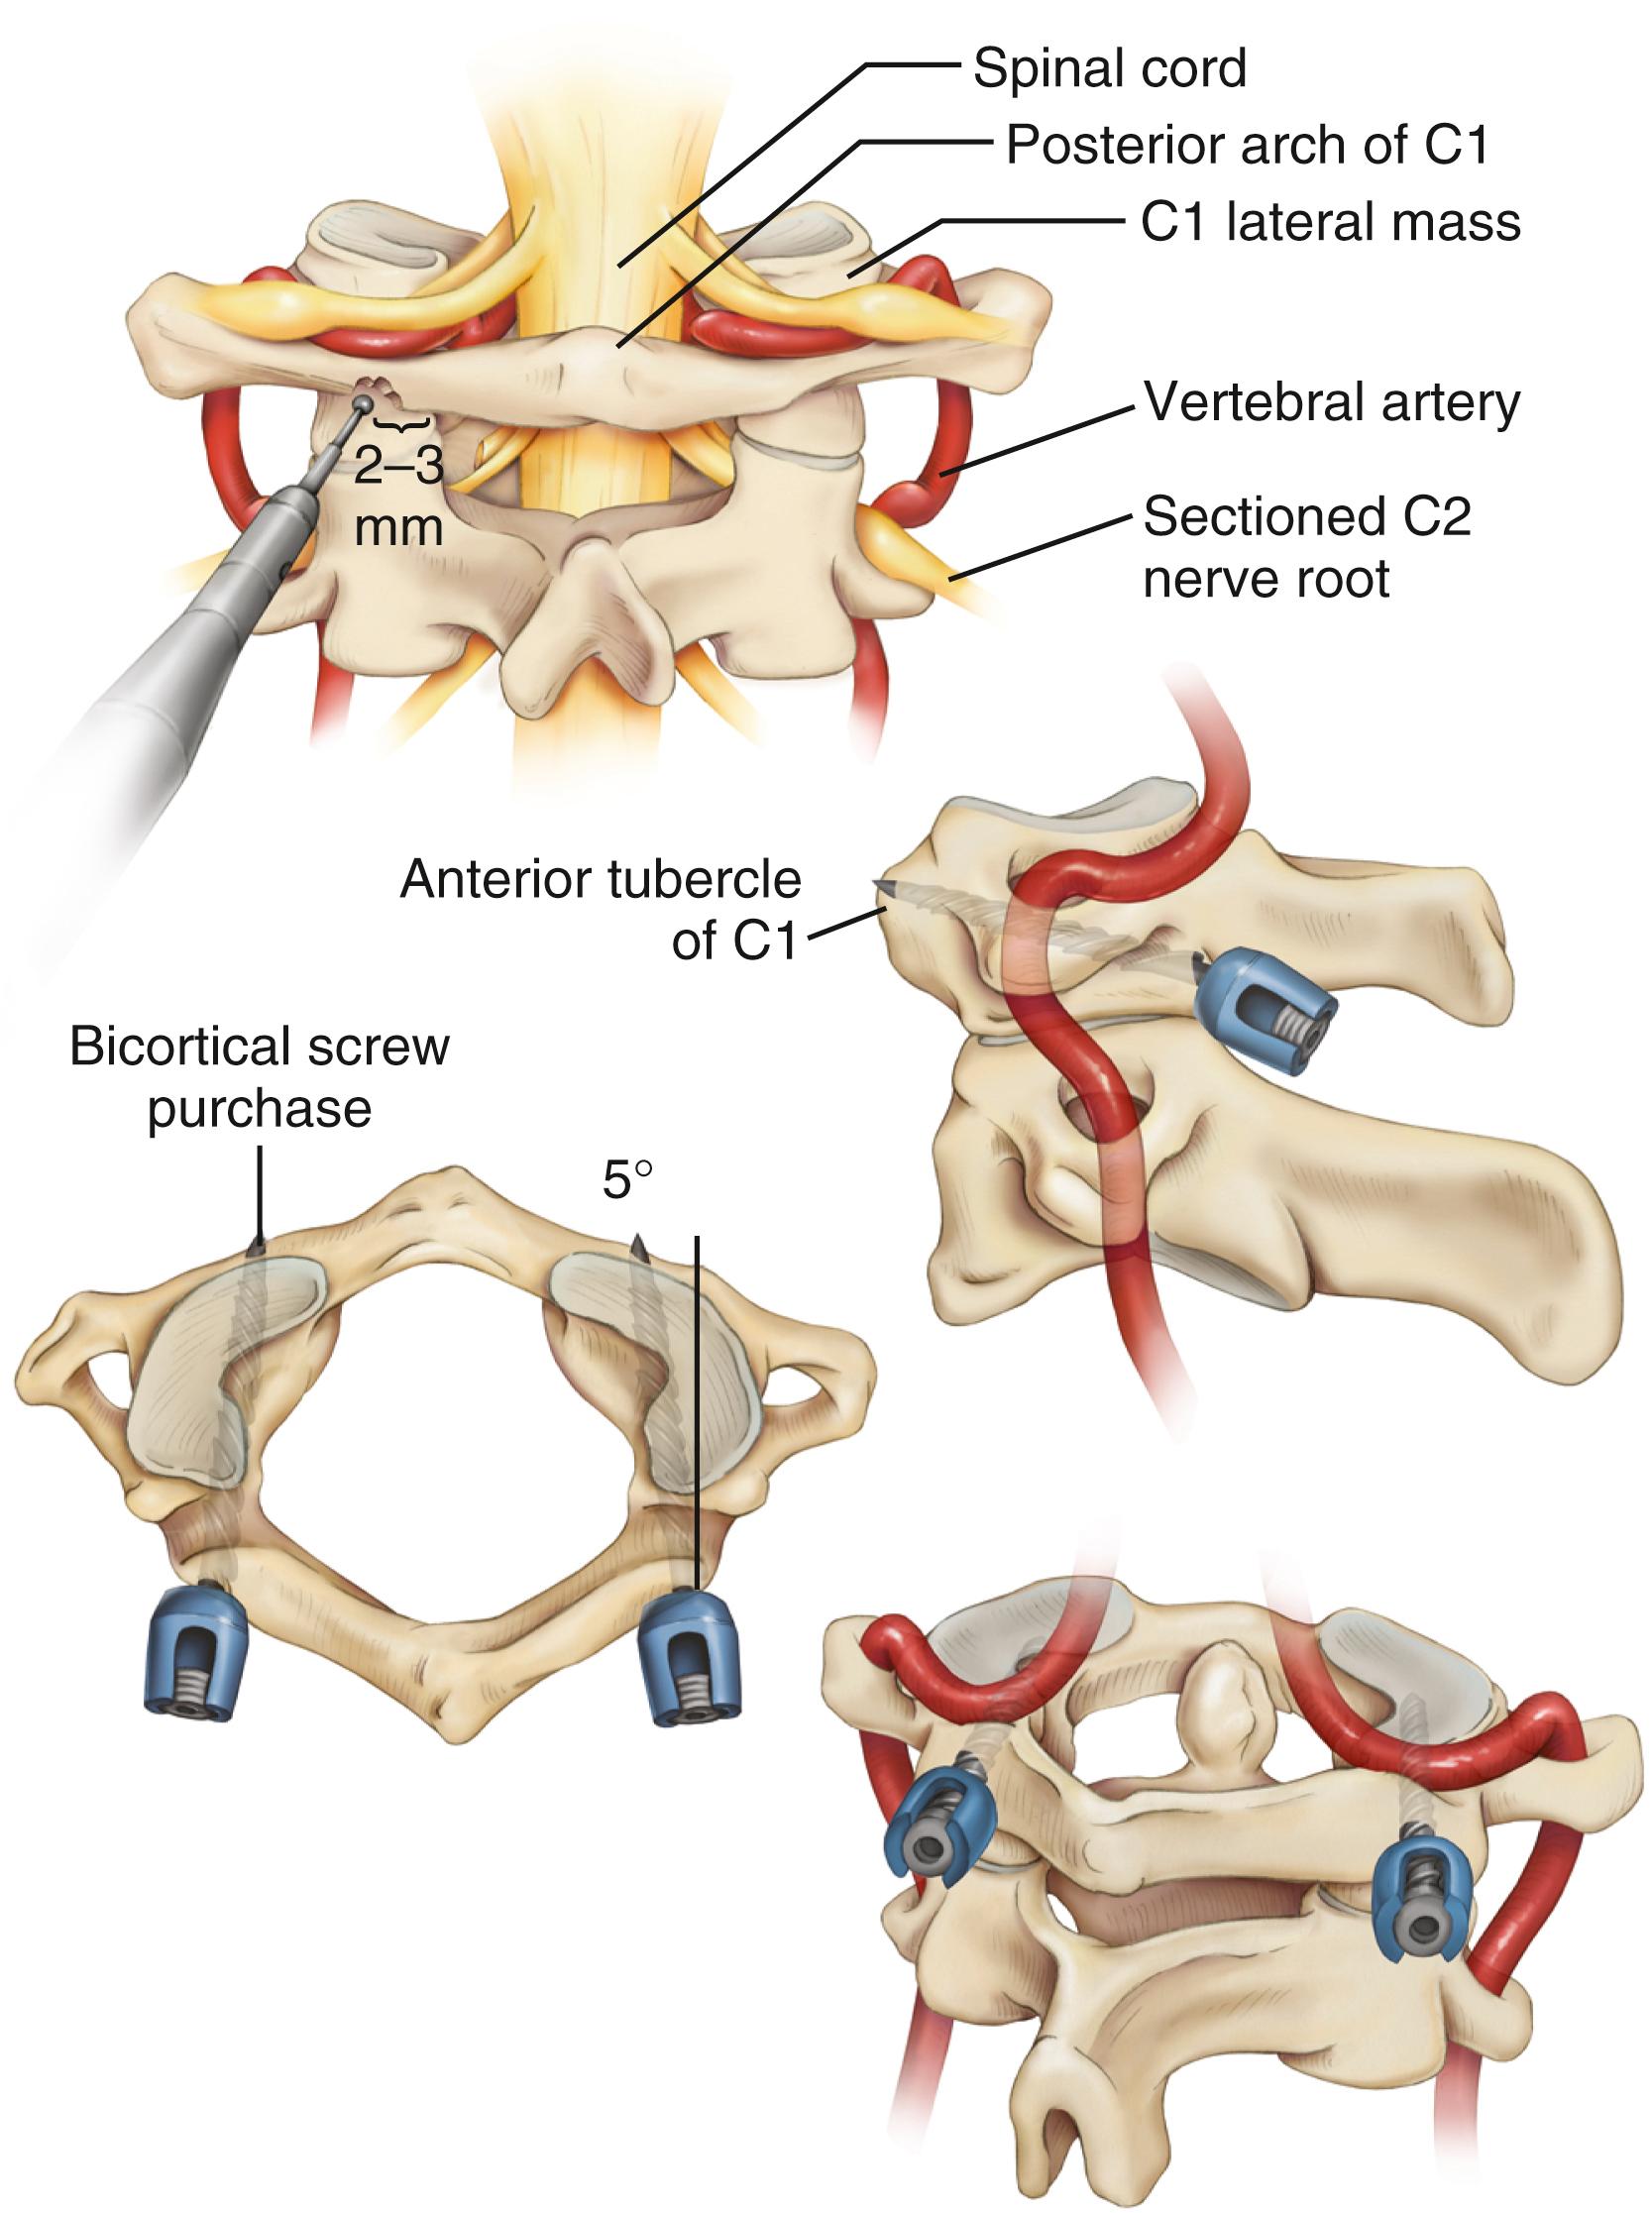 FIGURE 78.3, C1-2 transarticular screw technique. A midline incision is made to expose the posterior elements from C1 to C3 with particular attention paid to C2-3 facet joints. The superior and medial aspects of the C2 pars are exposed. There is no reason to expose the lateral aspect of the C2 pars; in fact, this may be a dangerous maneuver because of the proximity of the vertebral artery. The roof of the C2 pedicle is followed to the C1-2 facet joint. The C2 entry point may be identified by first locating the medial edge of the C2-3 facet joint. The C2 entry site is just lateral and rostral to this point and may be estimated by visualizing the course of the medial pars (approximately 3 mm up and 3 mm out). The drill or K-wire, either through a stab incision lateral to the T1 spinous process or through an extended incision, is typically directed 15 degrees medial, with the superior angle visualized by fluoroscopy. The drill or K-wire is directed down the C2 pedicle and across the C1-2 joint, aiming at the anterior tubercle of C1. The tip of the drill or K-wire is advanced to a point 4 mm short of the anterior C1 tubercle, attaining purchase of the anterior cortex of C1. After tapping, a fully threaded 3.5- or 4.0-mm-diameter cortical screw is used. The necessary screw length can be measured directly from the drill or the K-wire. Screws are typically 34 to 44 mm in length. The technique is repeated on the contralateral side.